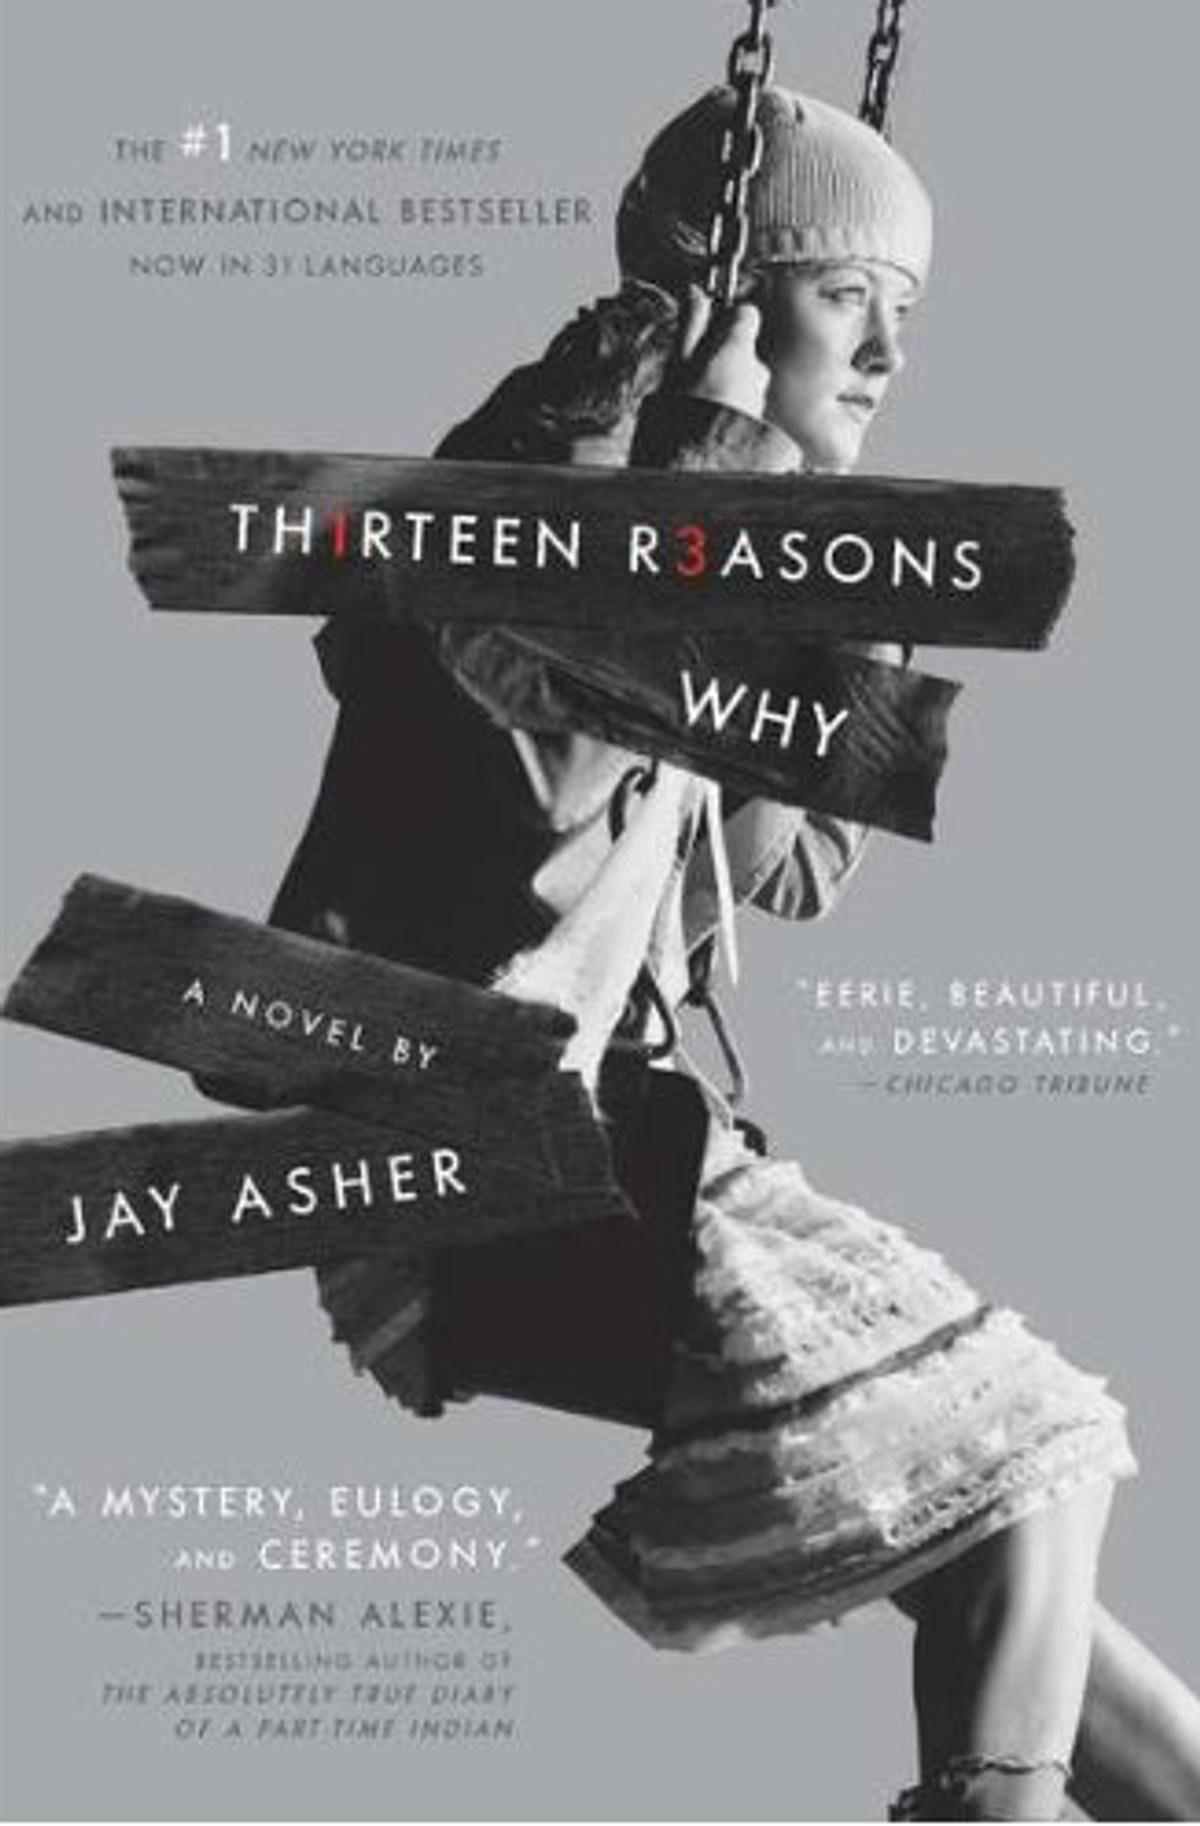 '13 Reasons Why' Should Be In Every High School Curriculum